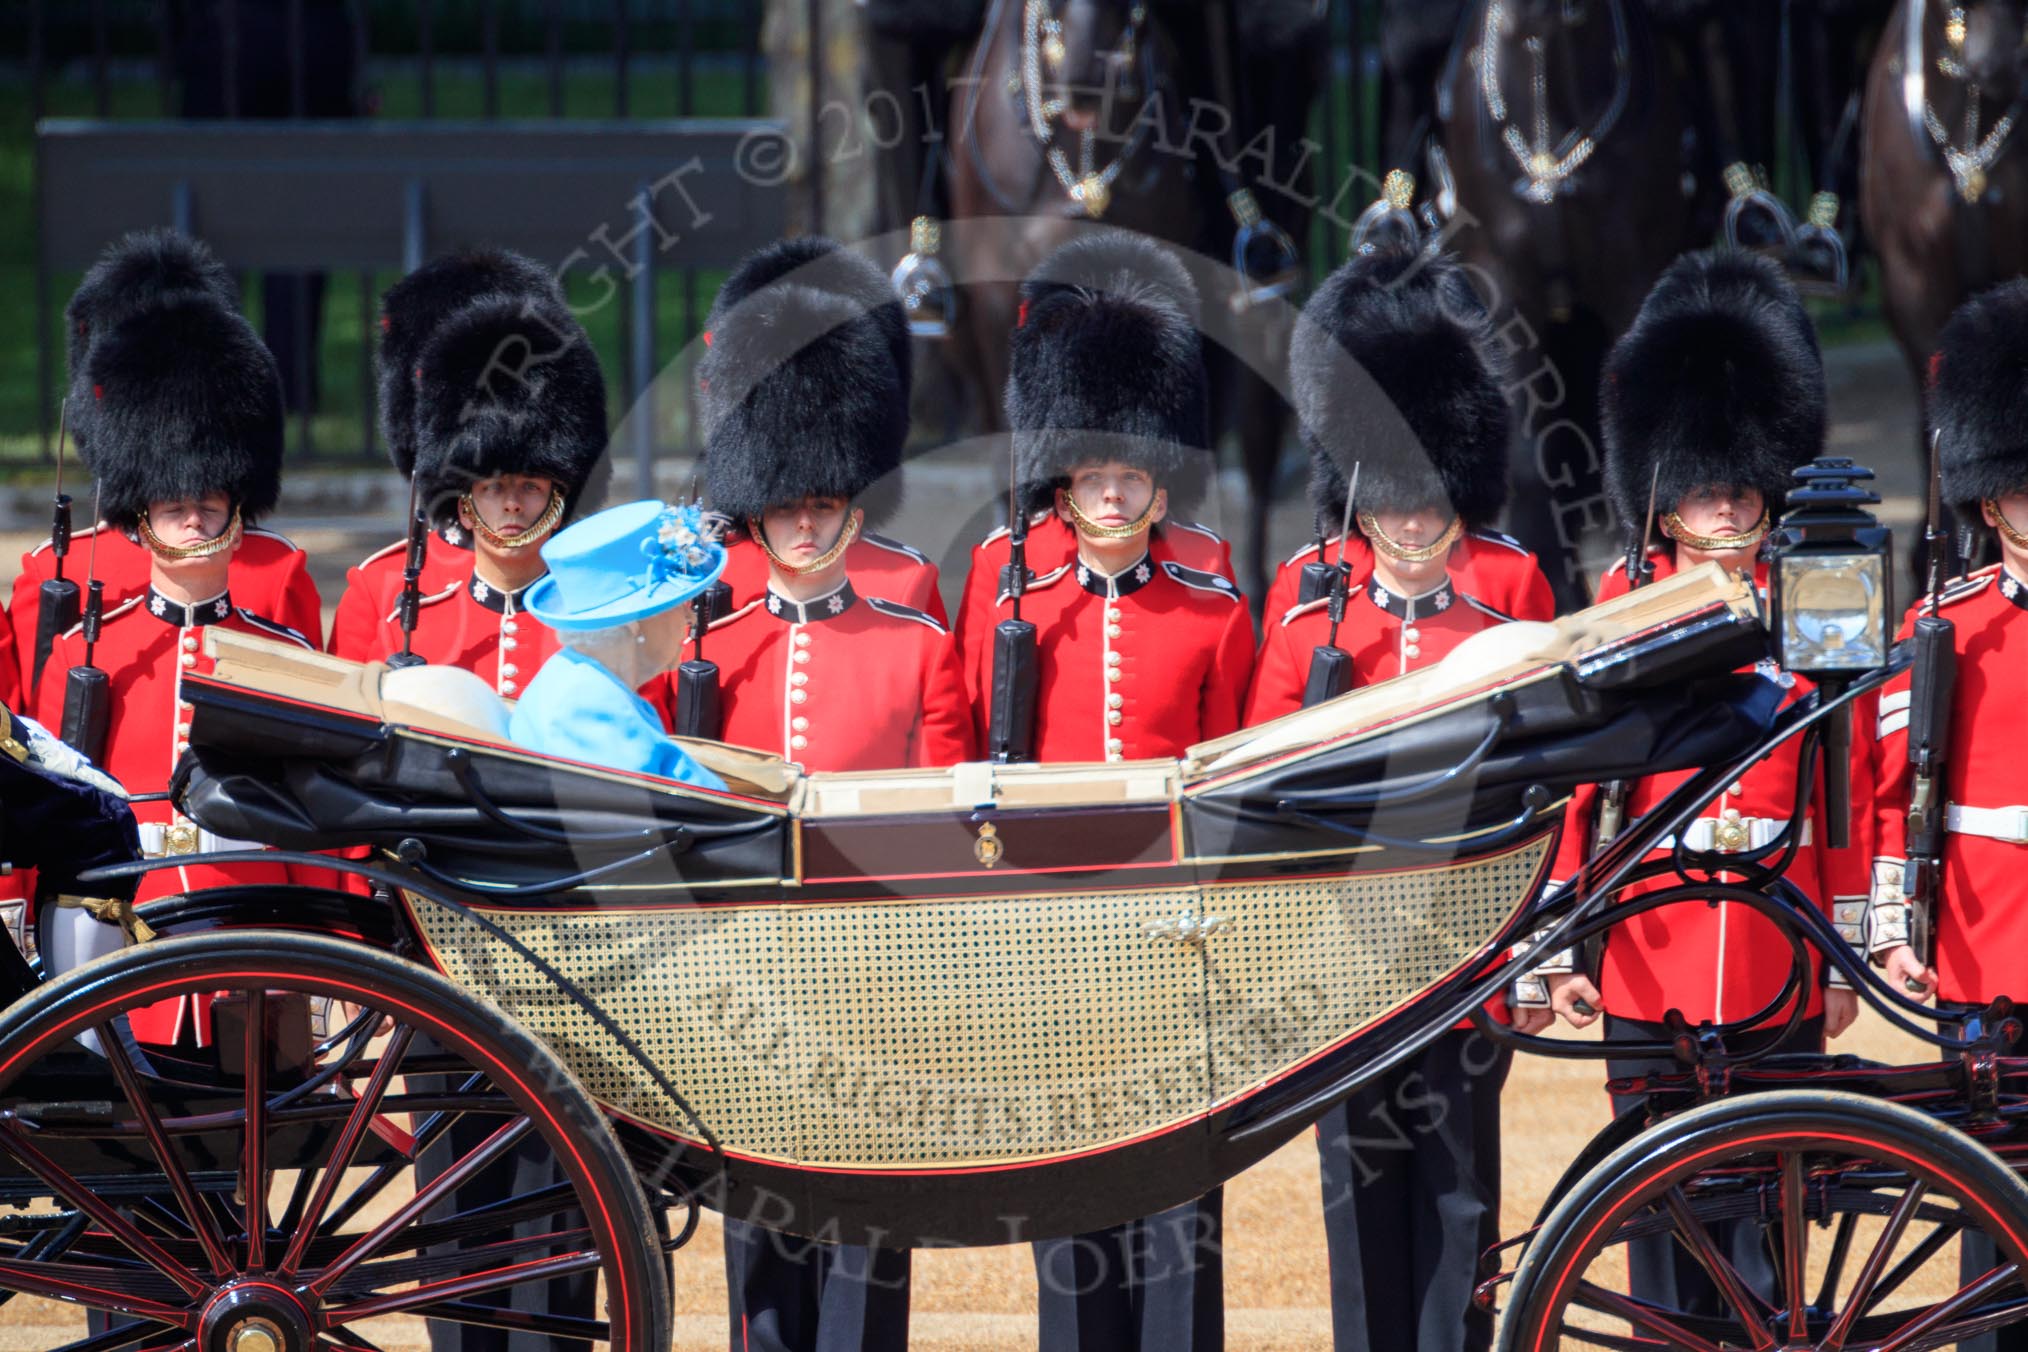 during Trooping the Colour {iptcyear4}, The Queen's Birthday Parade at Horse Guards Parade, Westminster, London, 9 June 2018, 11:01.